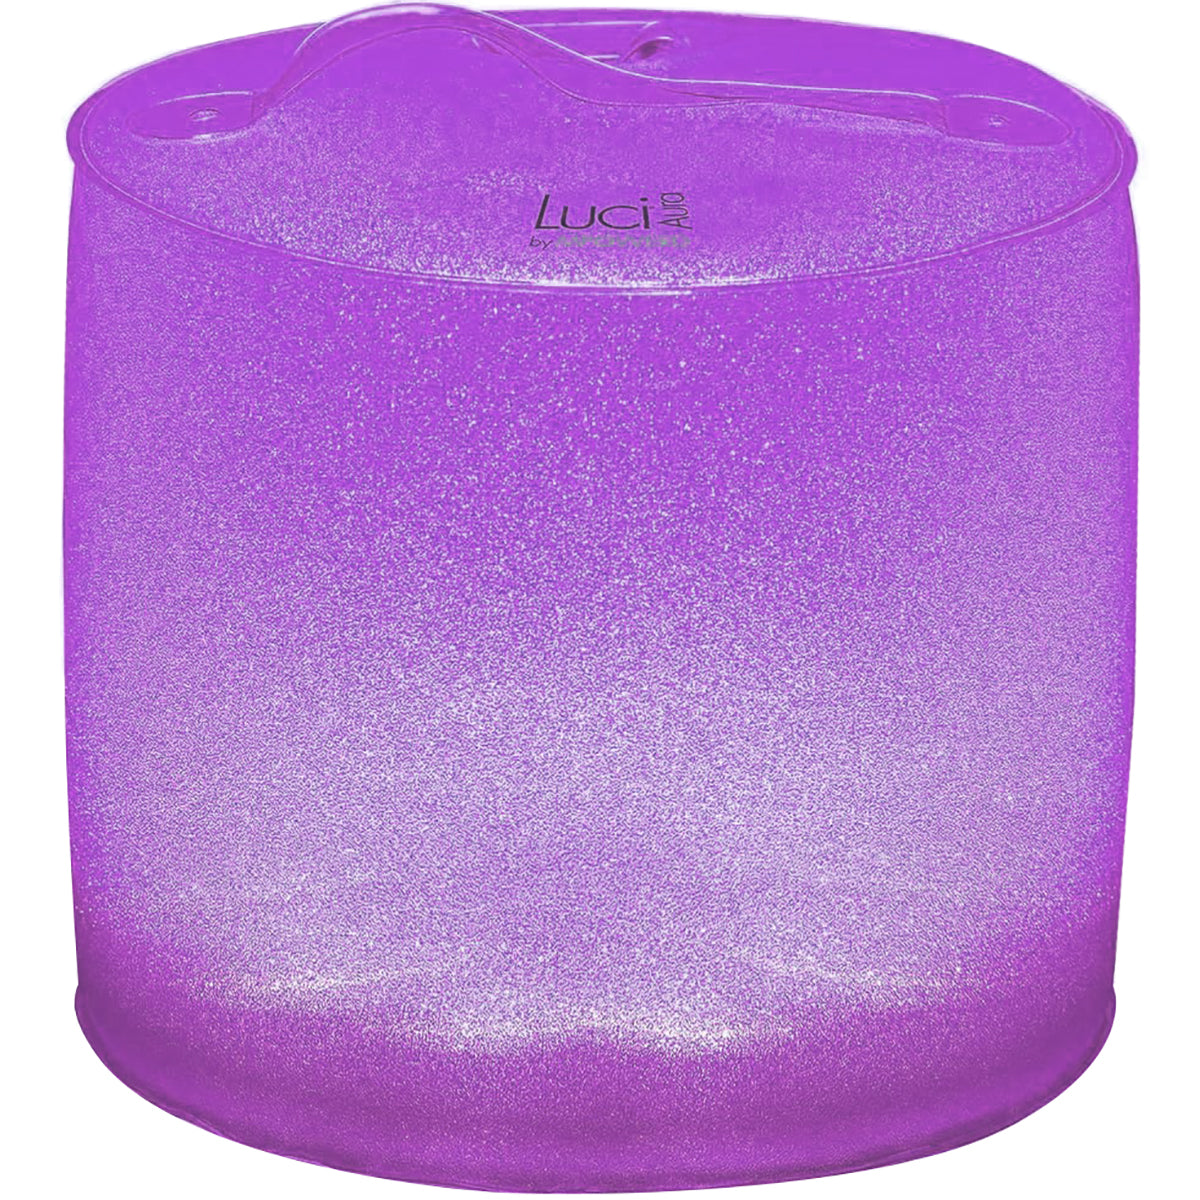 MPOWERD Luci Aura Color-Changing Frosted Glitter Finish Inflatable Solar Light MPOWERD